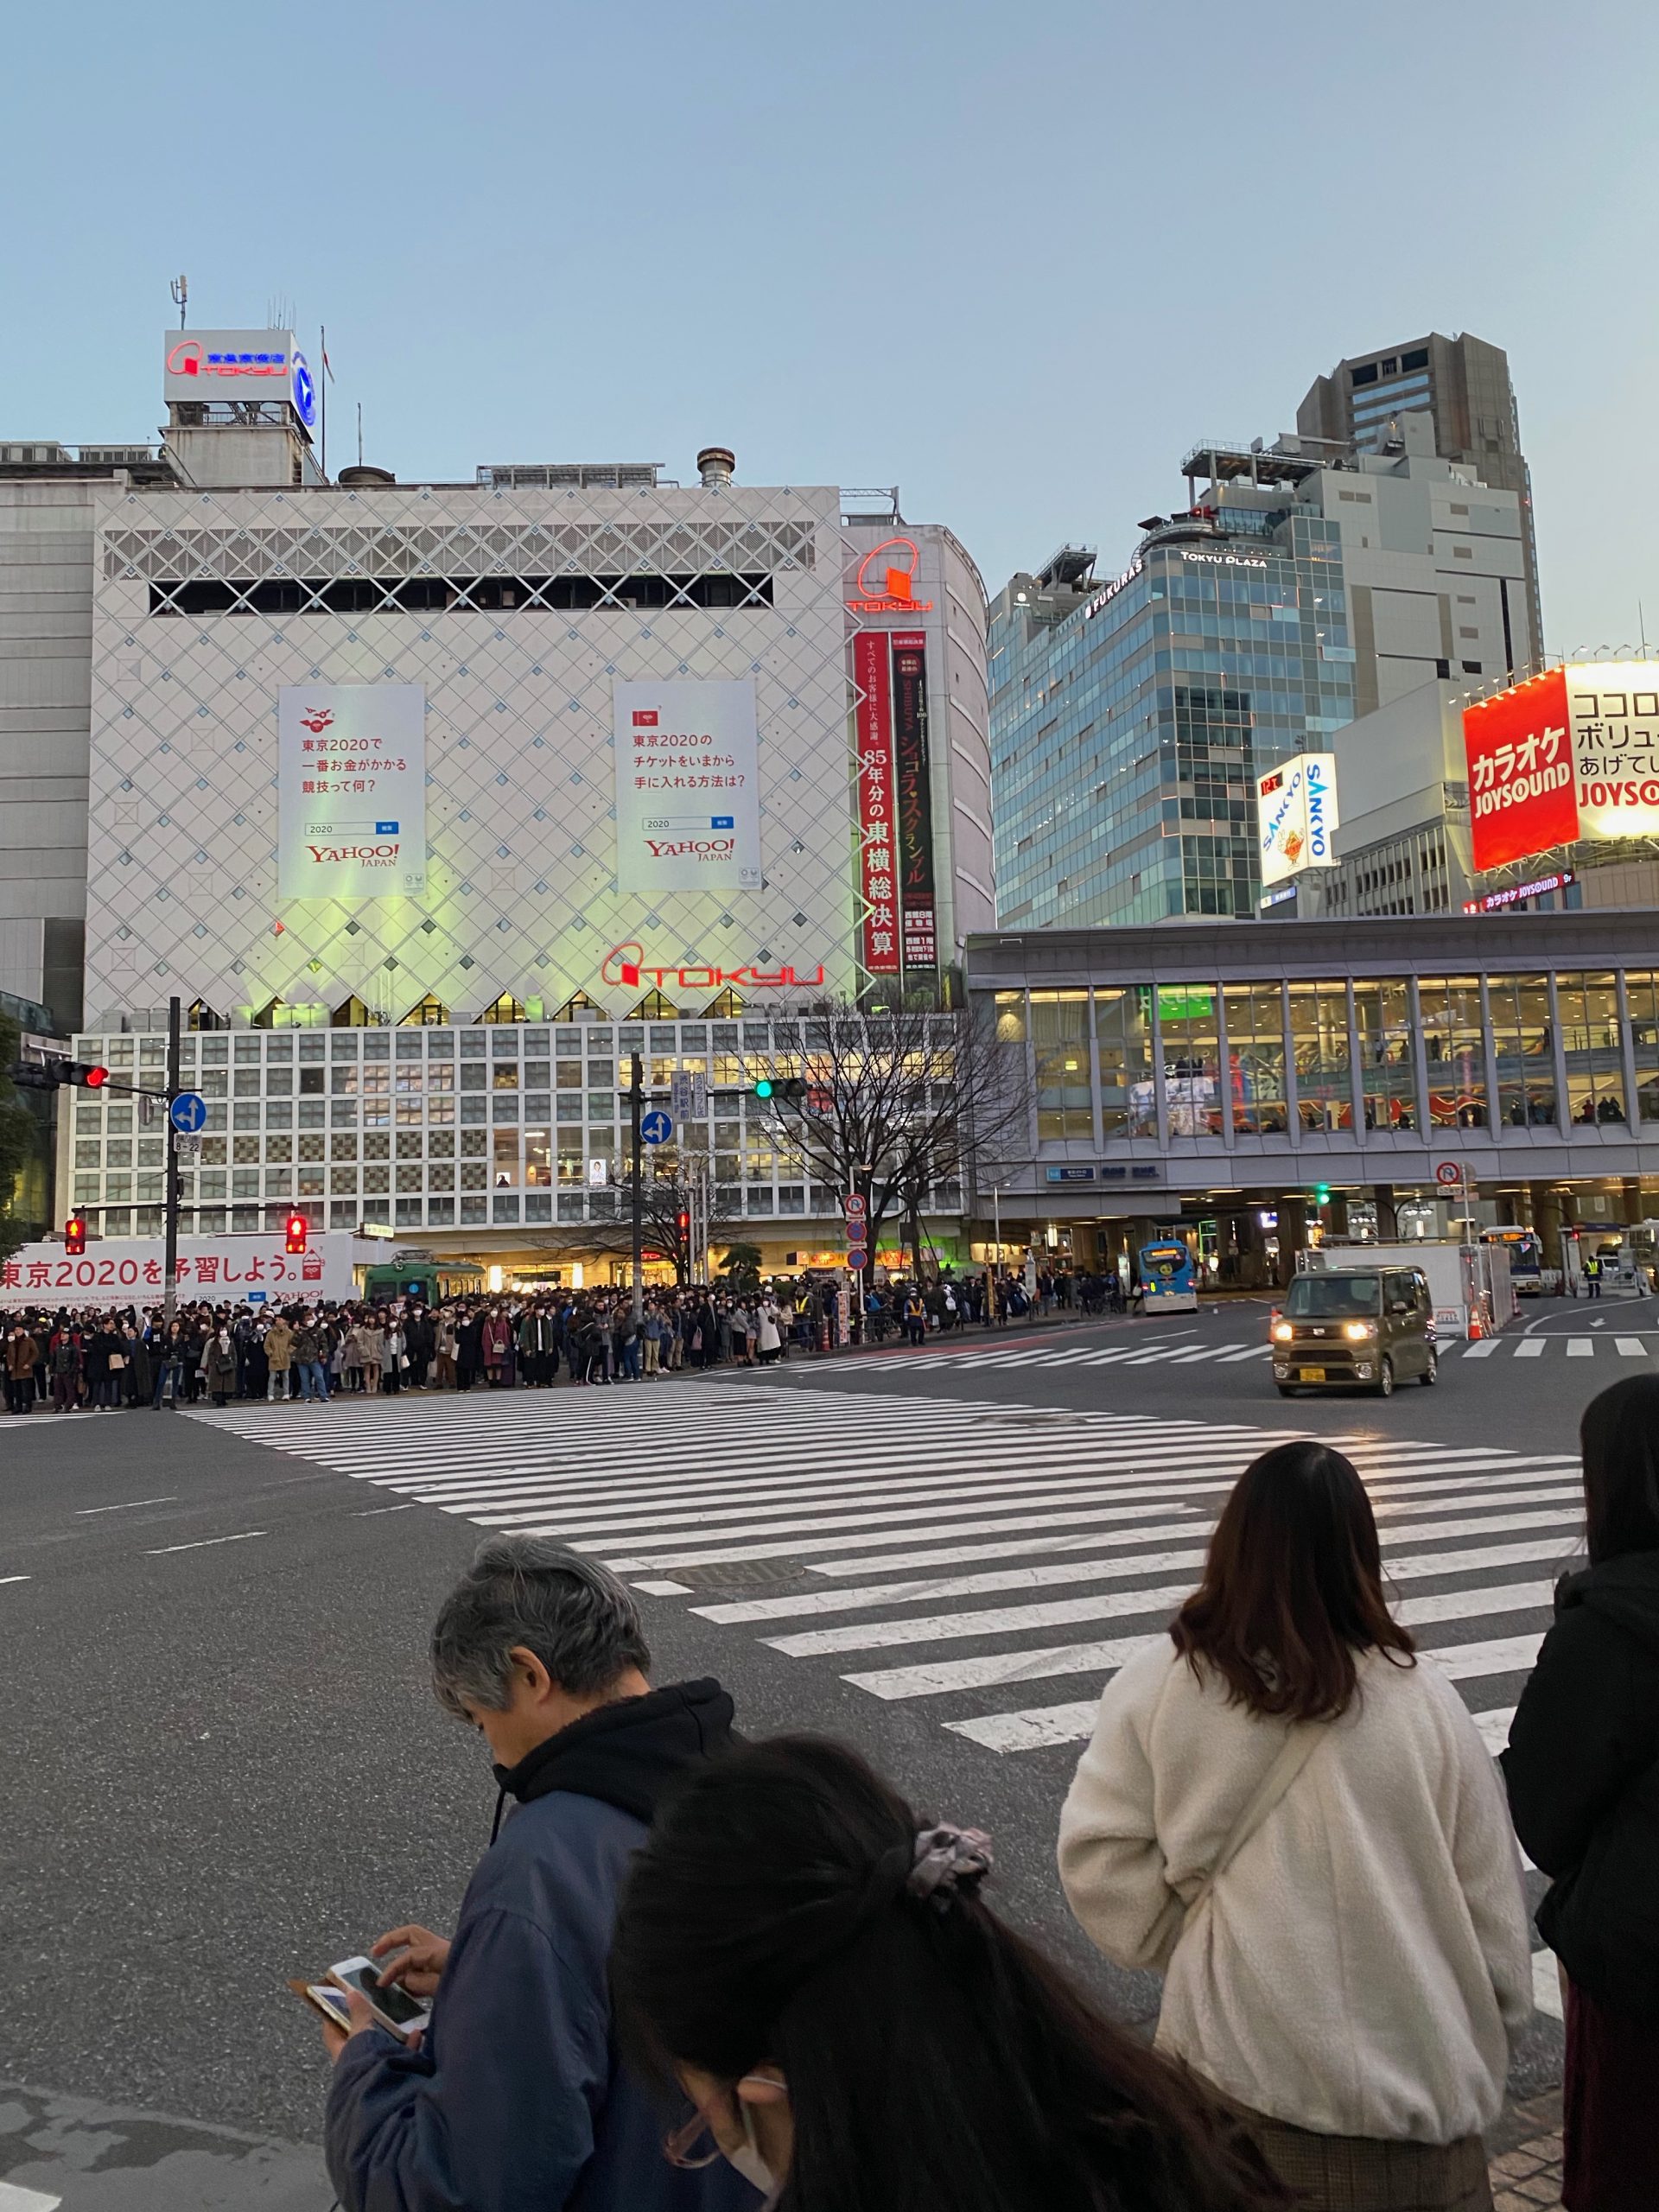 A large crowd of people waiting on the sidewalk to cross at Shibuya Crossing